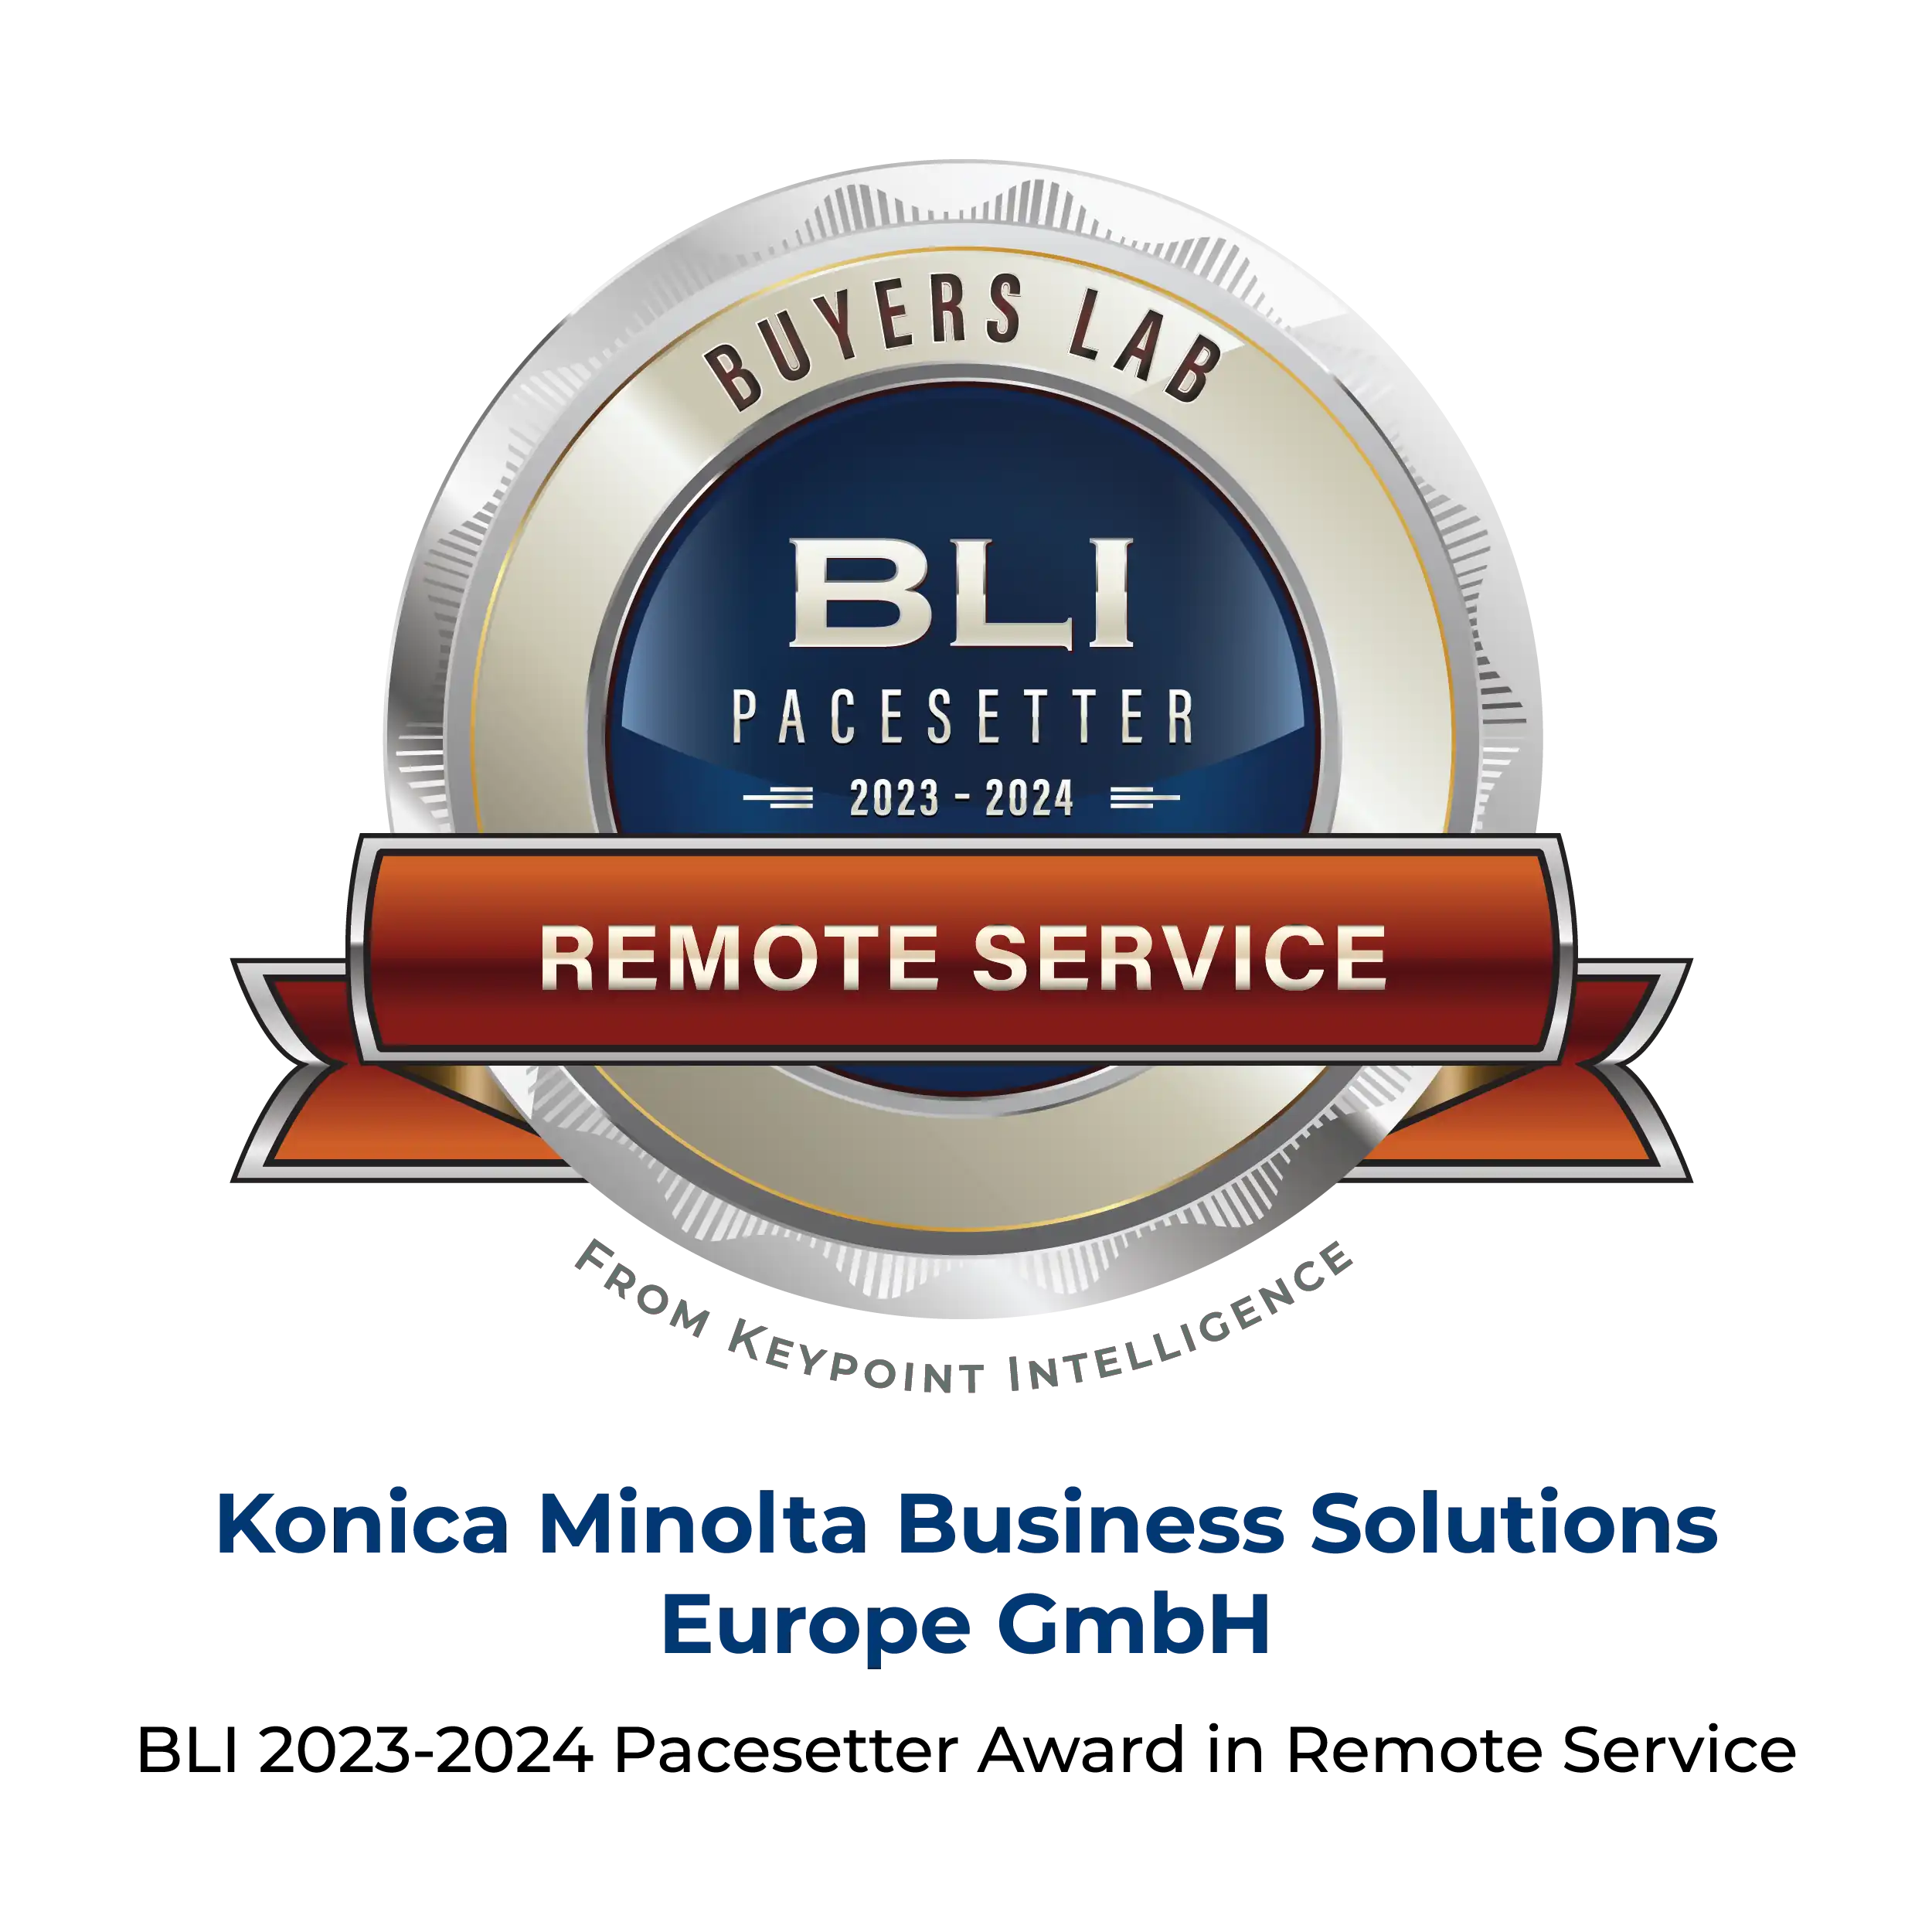 Seal-BLI-2023-2024-Pacesetter-Award-in-Remote-Service